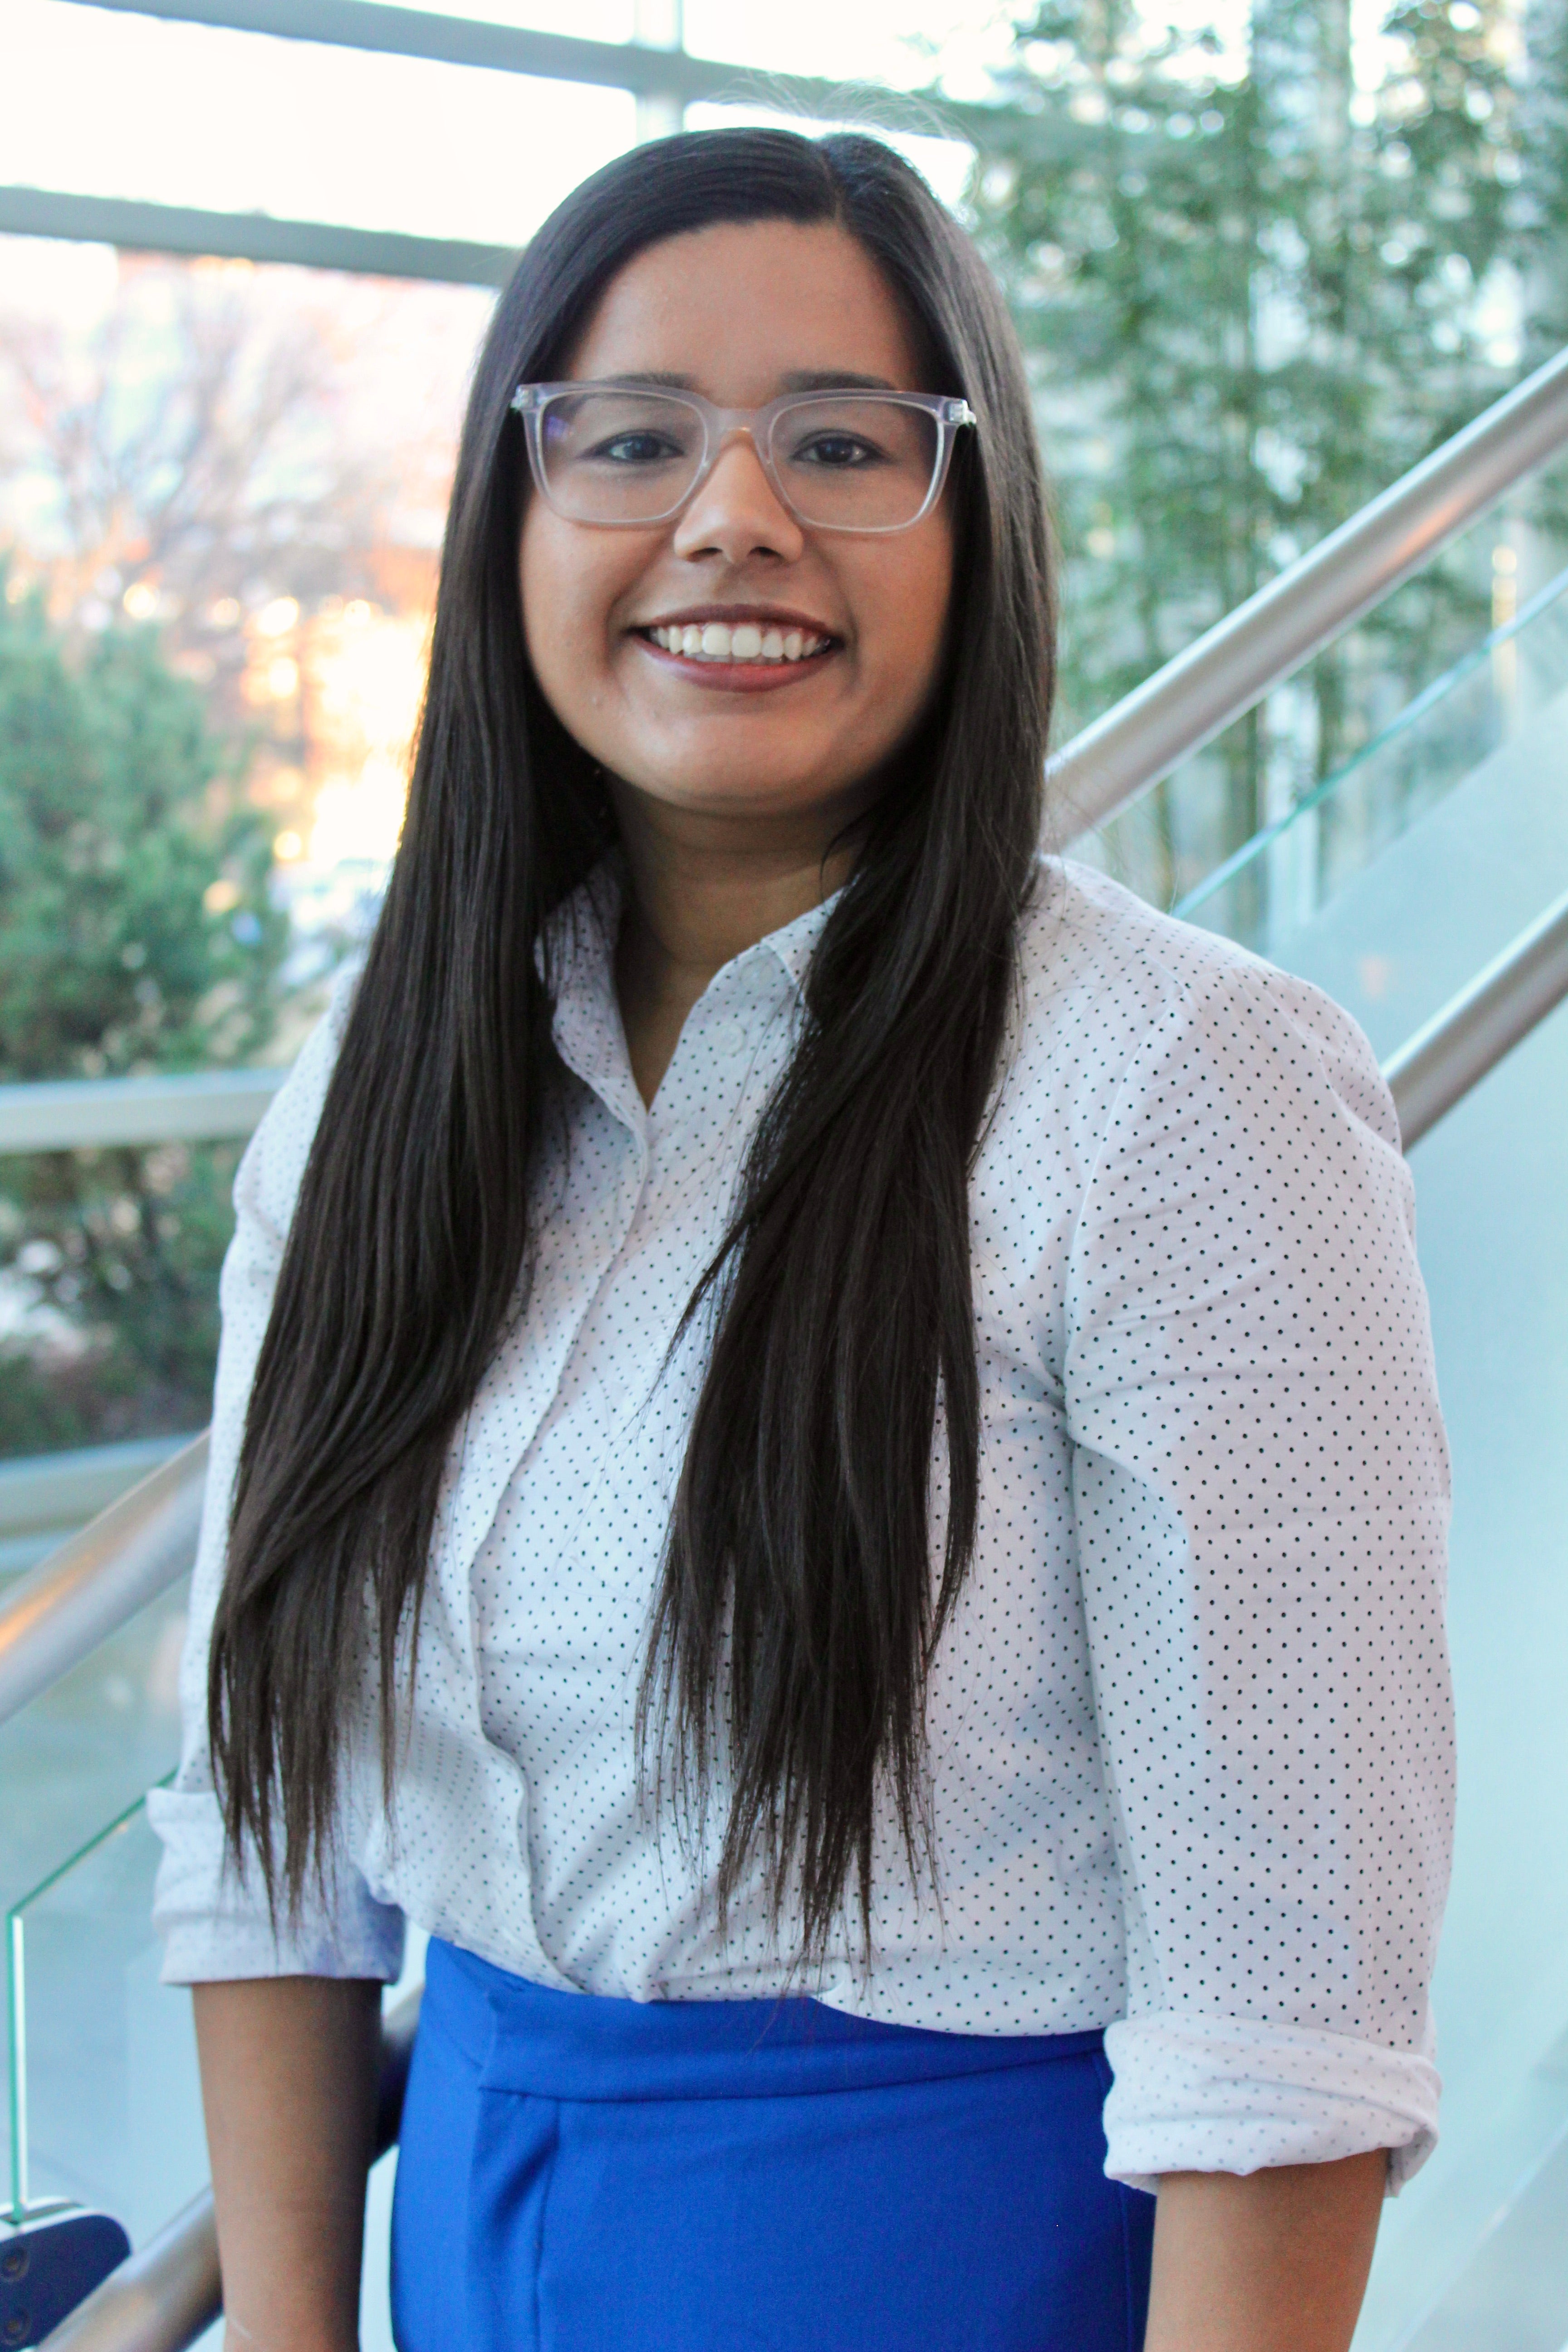 Photo of Evelyn Hernandez, Senior Transfer Admissions Counselor at Boise State